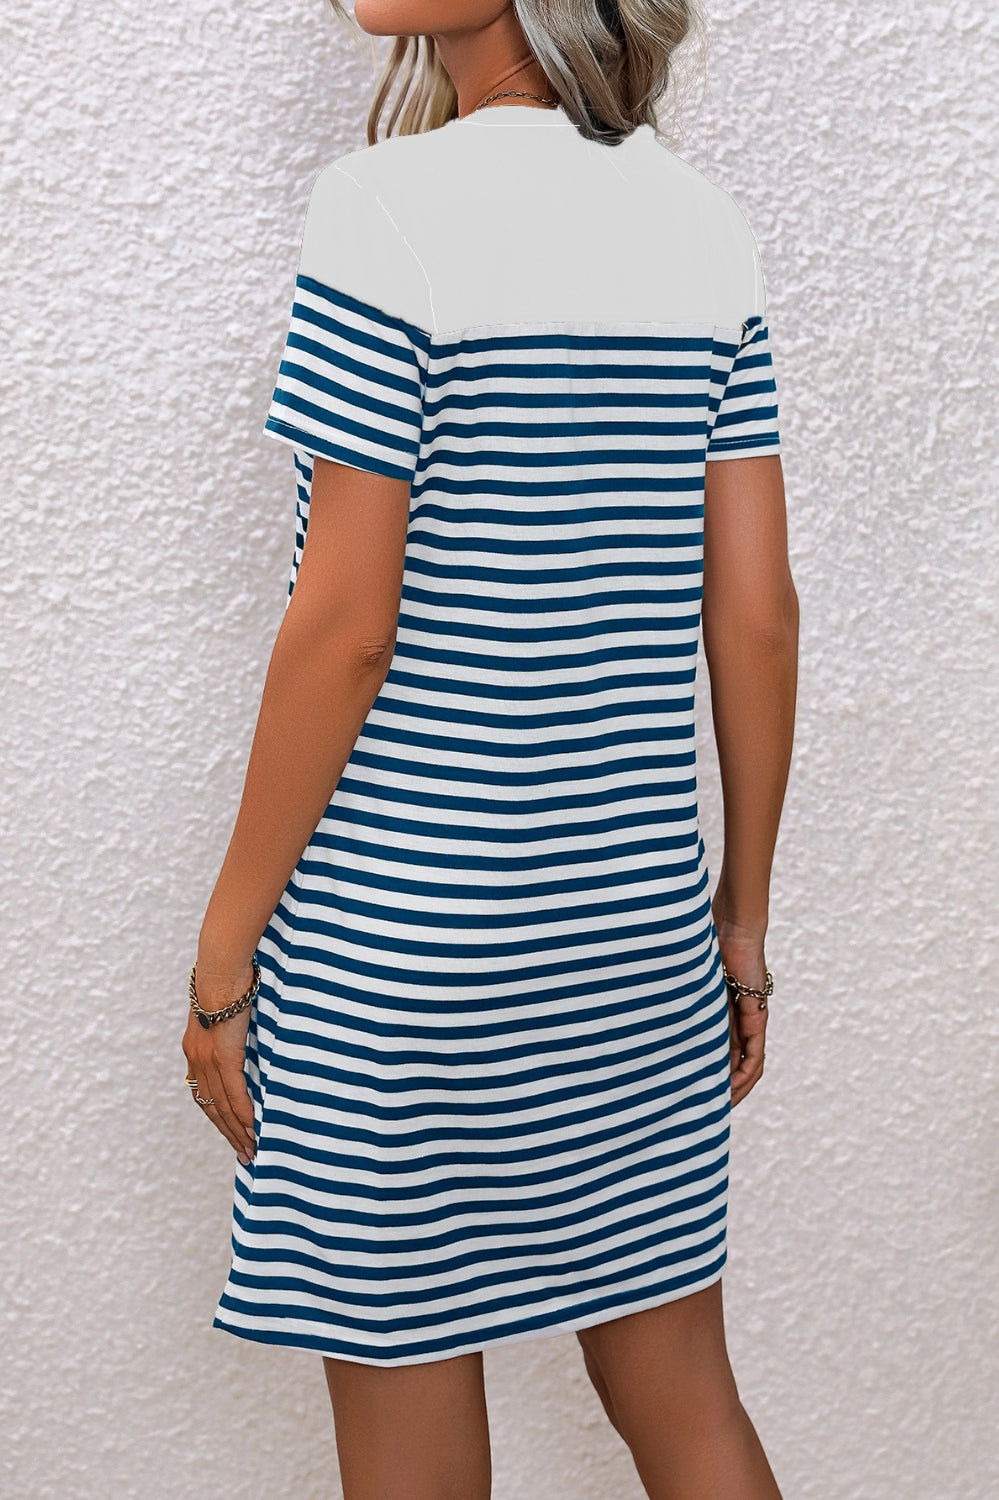 Striped Round Neck Short Sleeve Mini Tee Dress Casual Chic Boutique